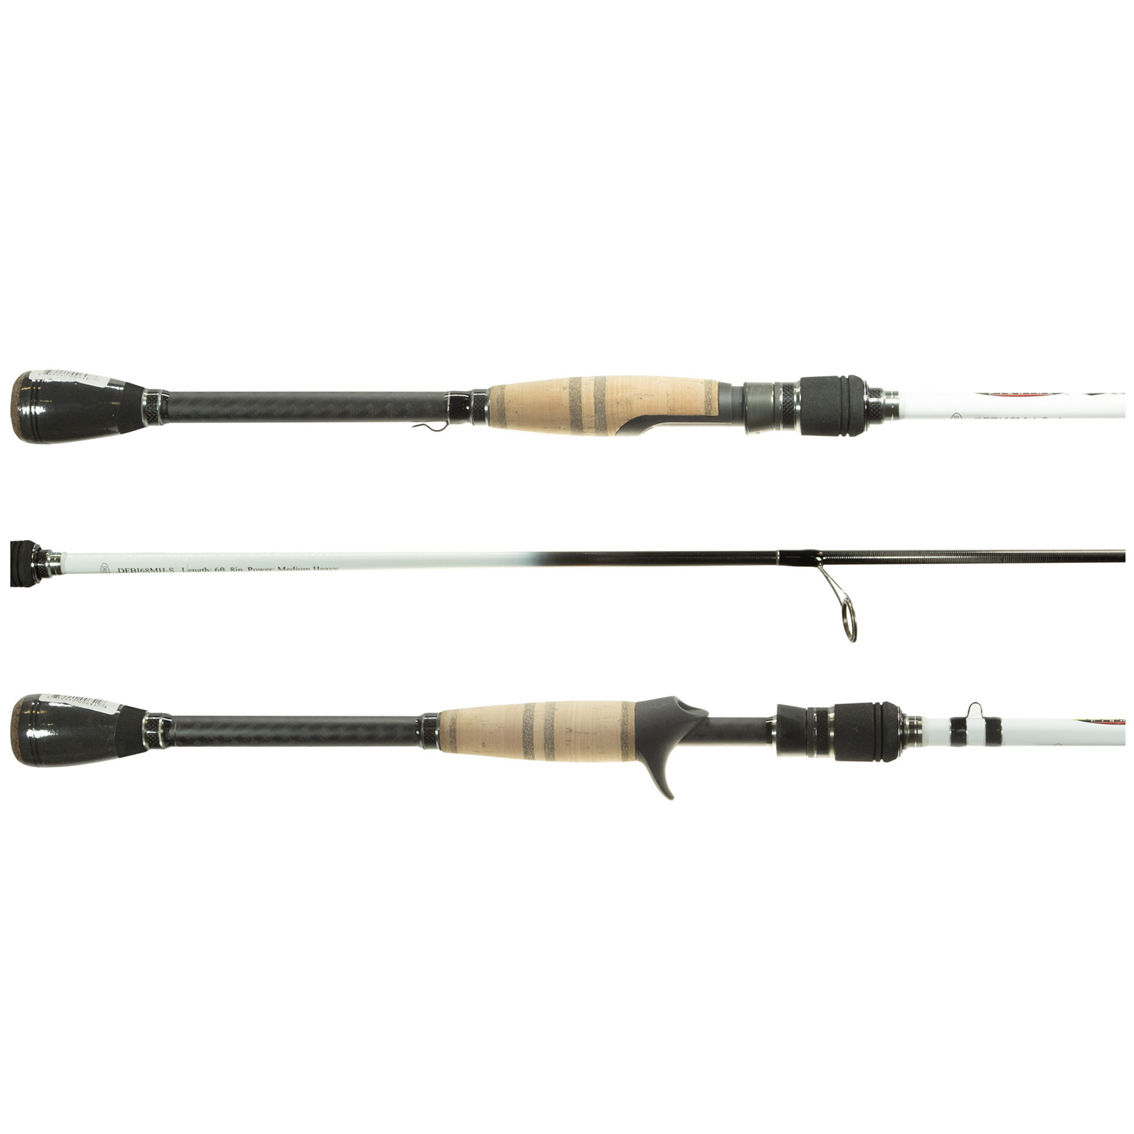 Duckett Fishing Black Ice 7'6 H Casting Rod, Fly Fishing Rods & Reels, Sports & Outdoors